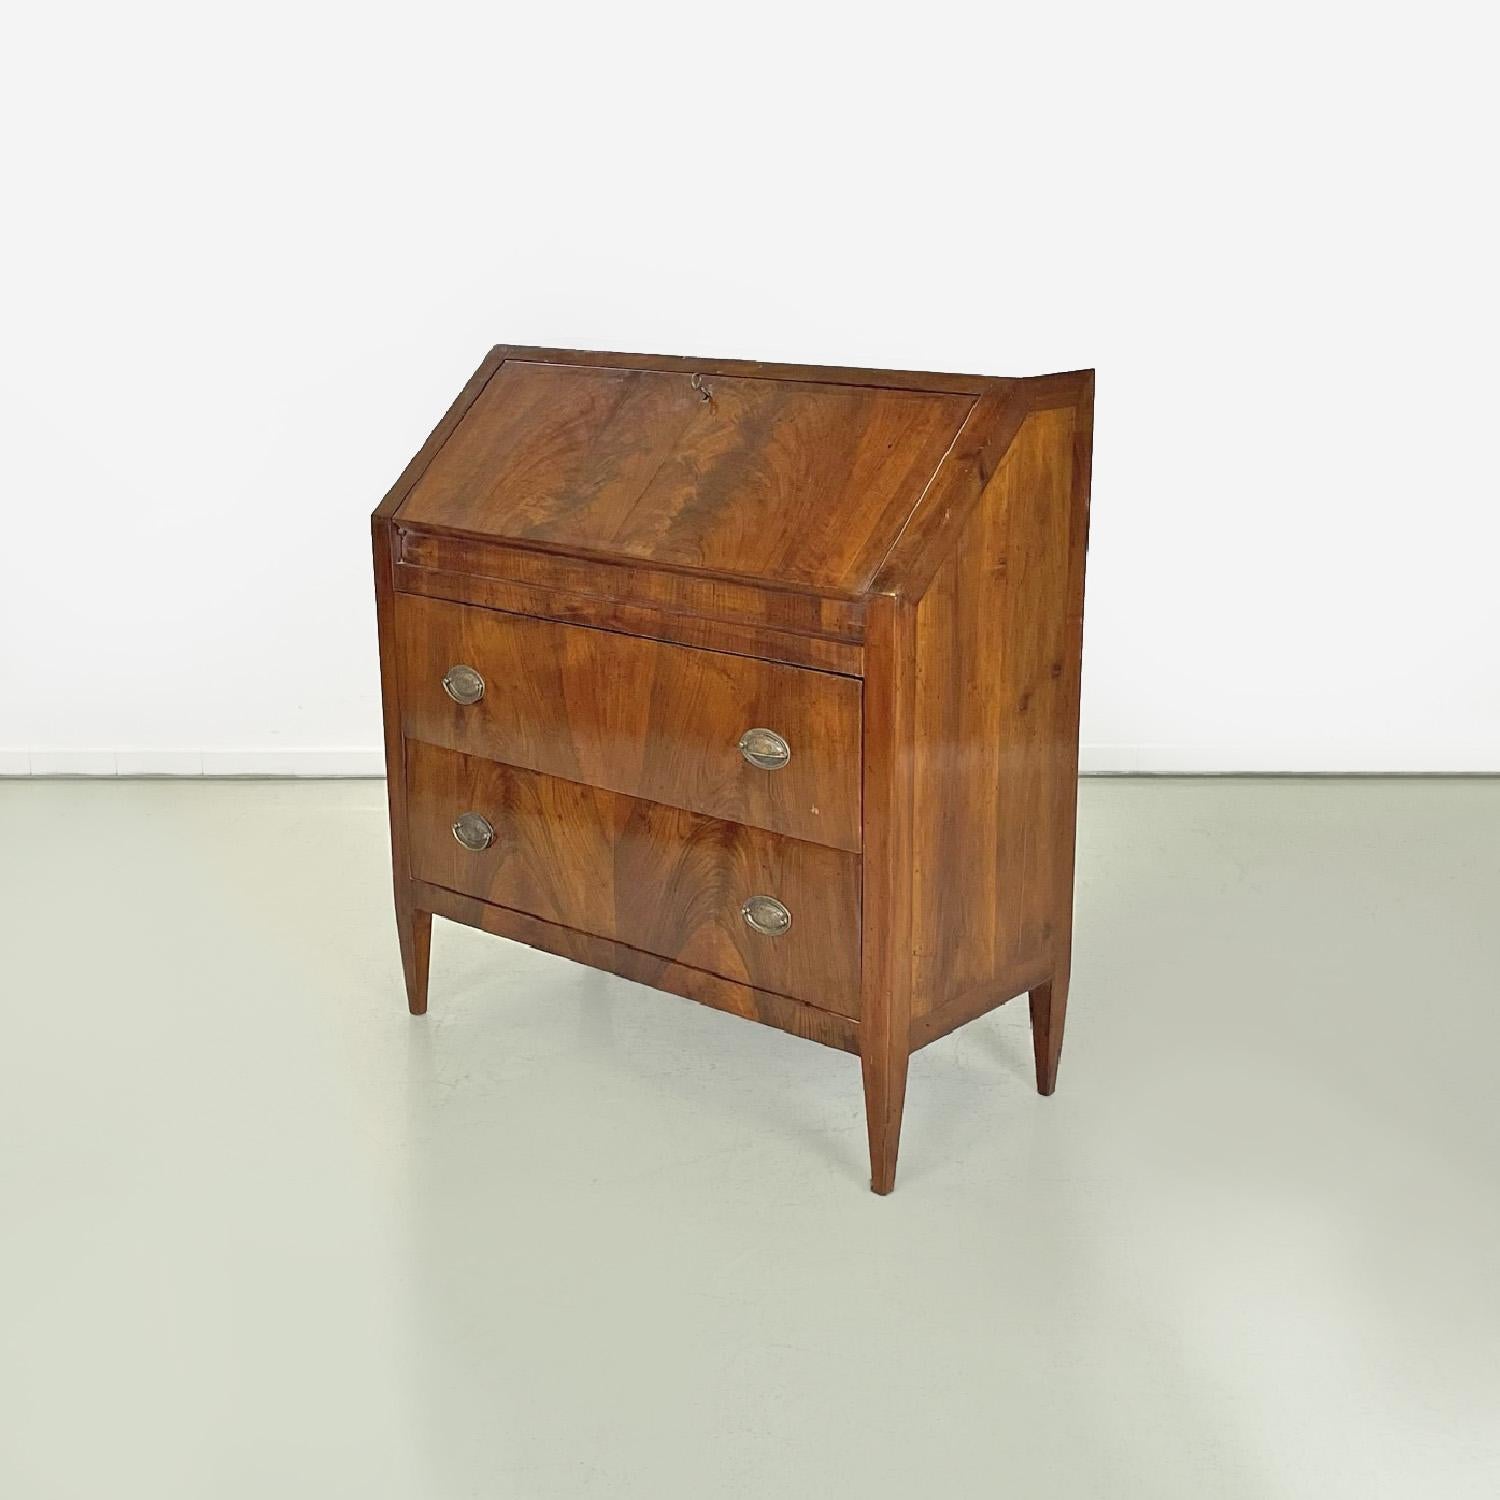 Italian wooden chest of drawers or writing desk with flap, 1900s
Chest of drawers with flap with rectangular base entirely in wood. In the upper part under the flap top there are four small drawers with worked brass knobs and a central door with